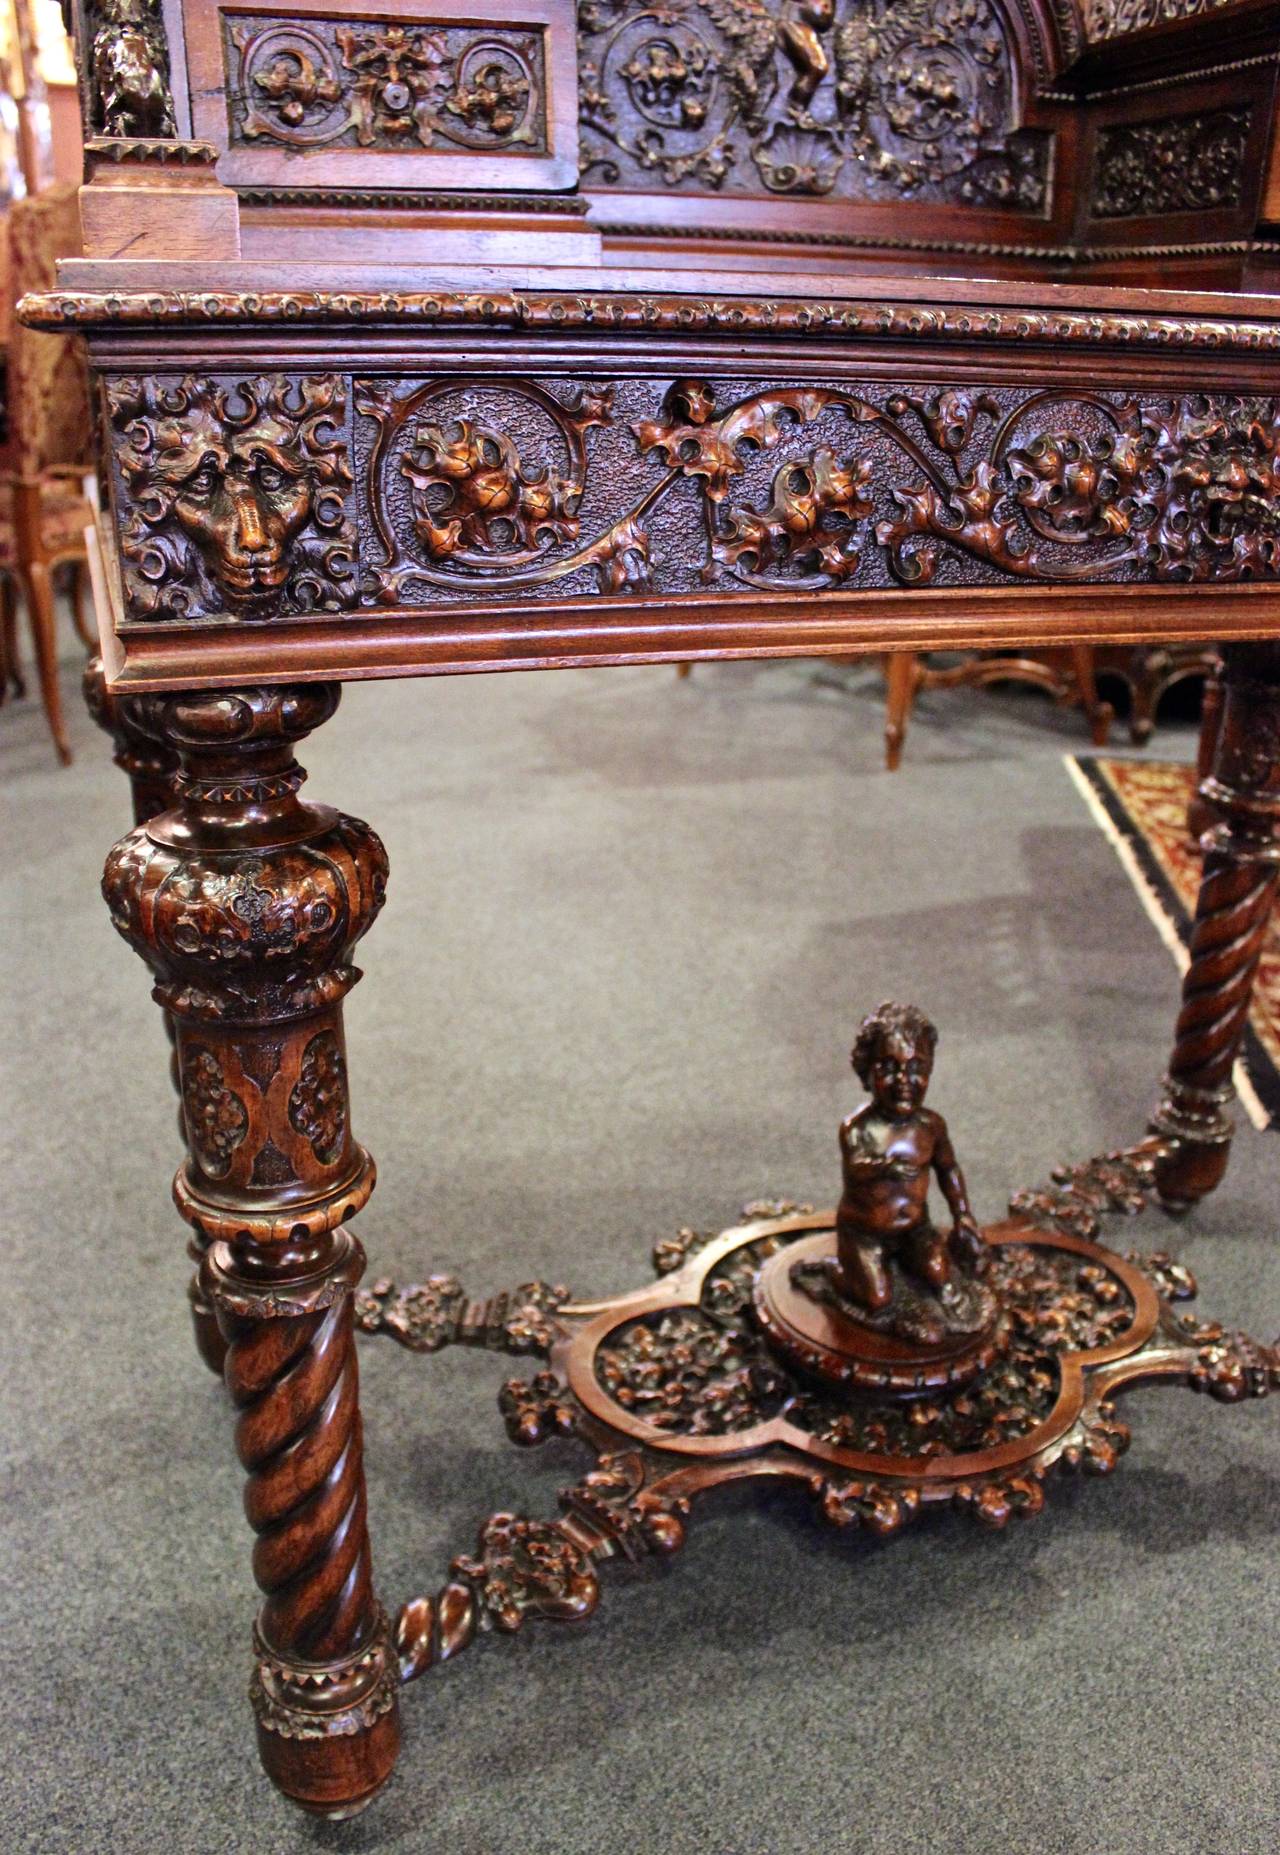 This ornately carved French desk is made from walnut.  The desk features superb carvings of cherubs and accent trimmings that are reminiscent of the Gothic style. Features one large pull out drawer under desk top and two smaller drawers raised above